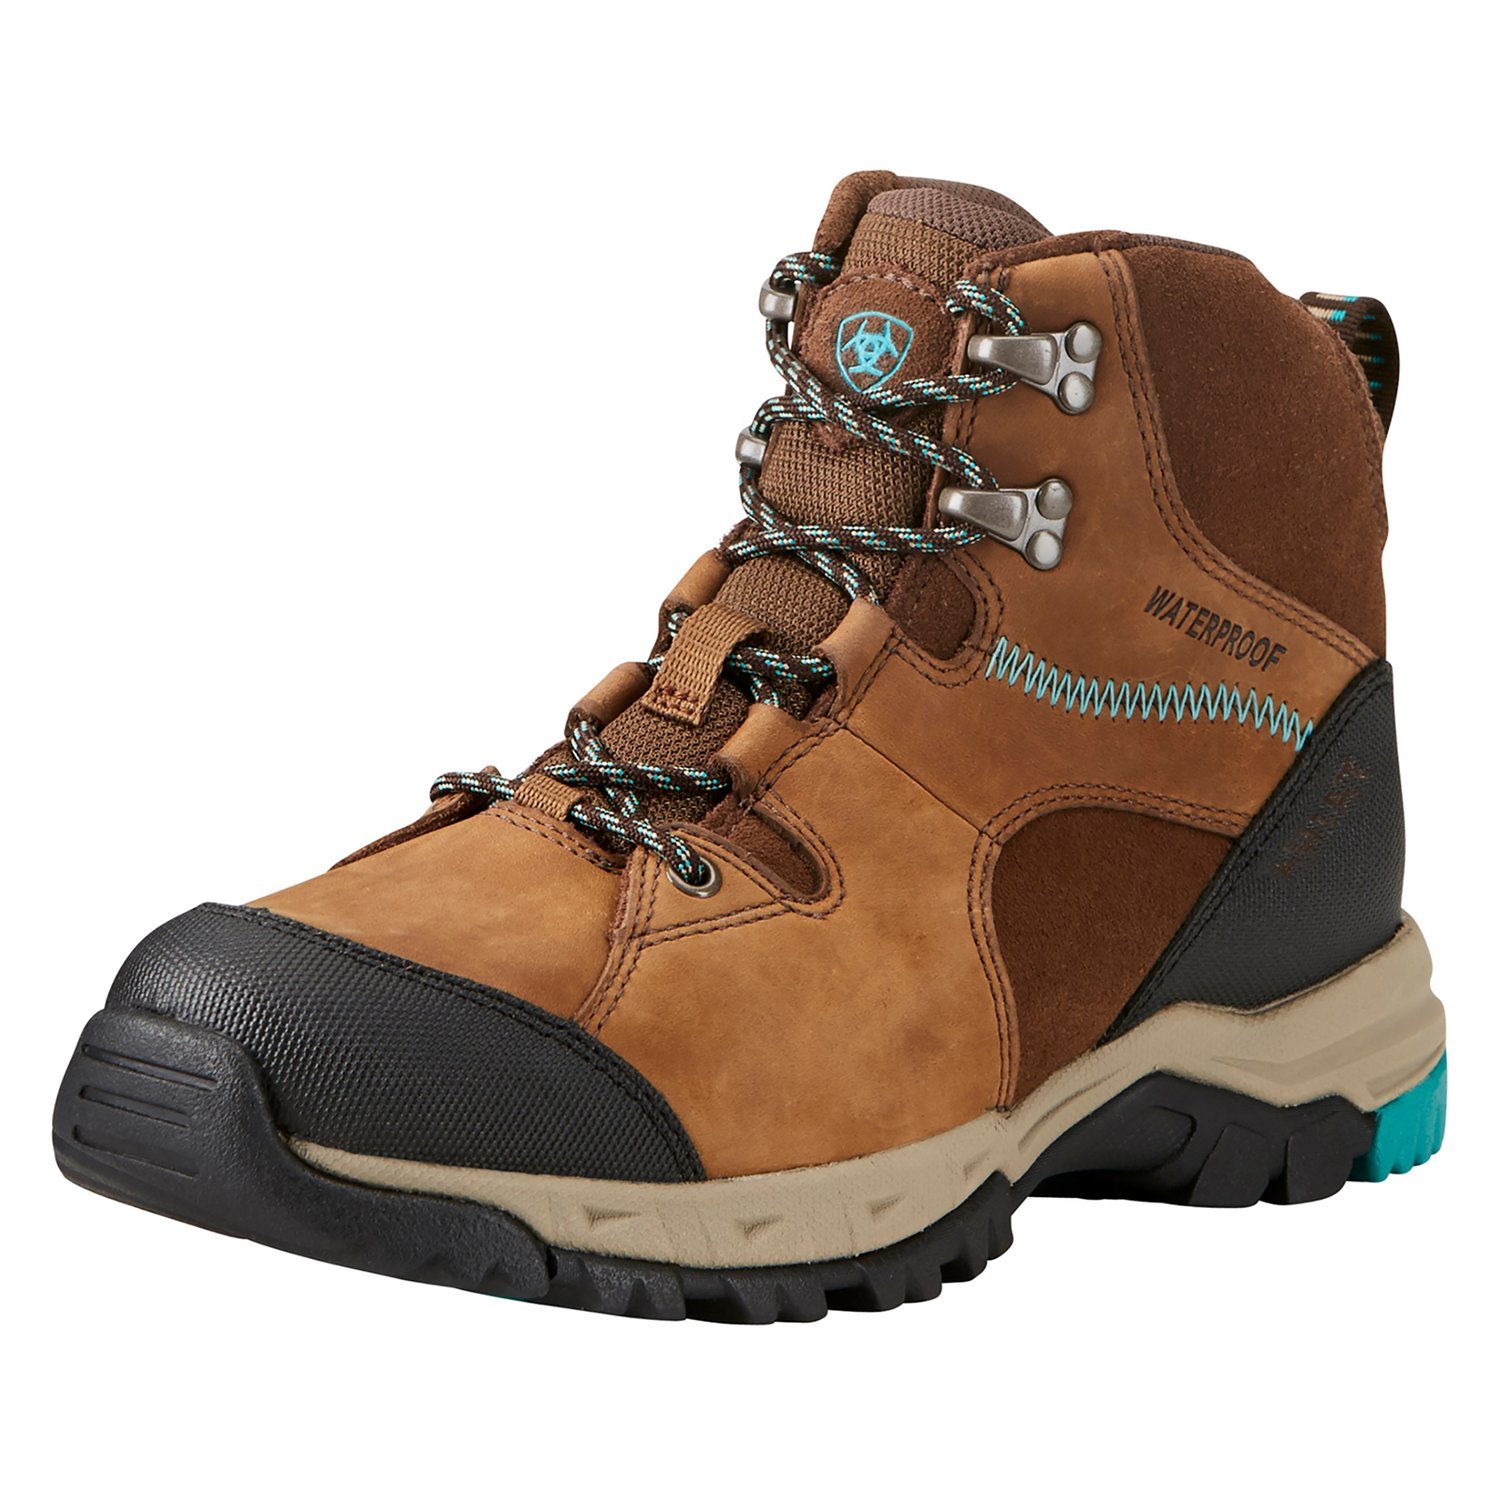 ARIAT Outdoorschuh Skyline Mid H2O distressed brown | 36,5